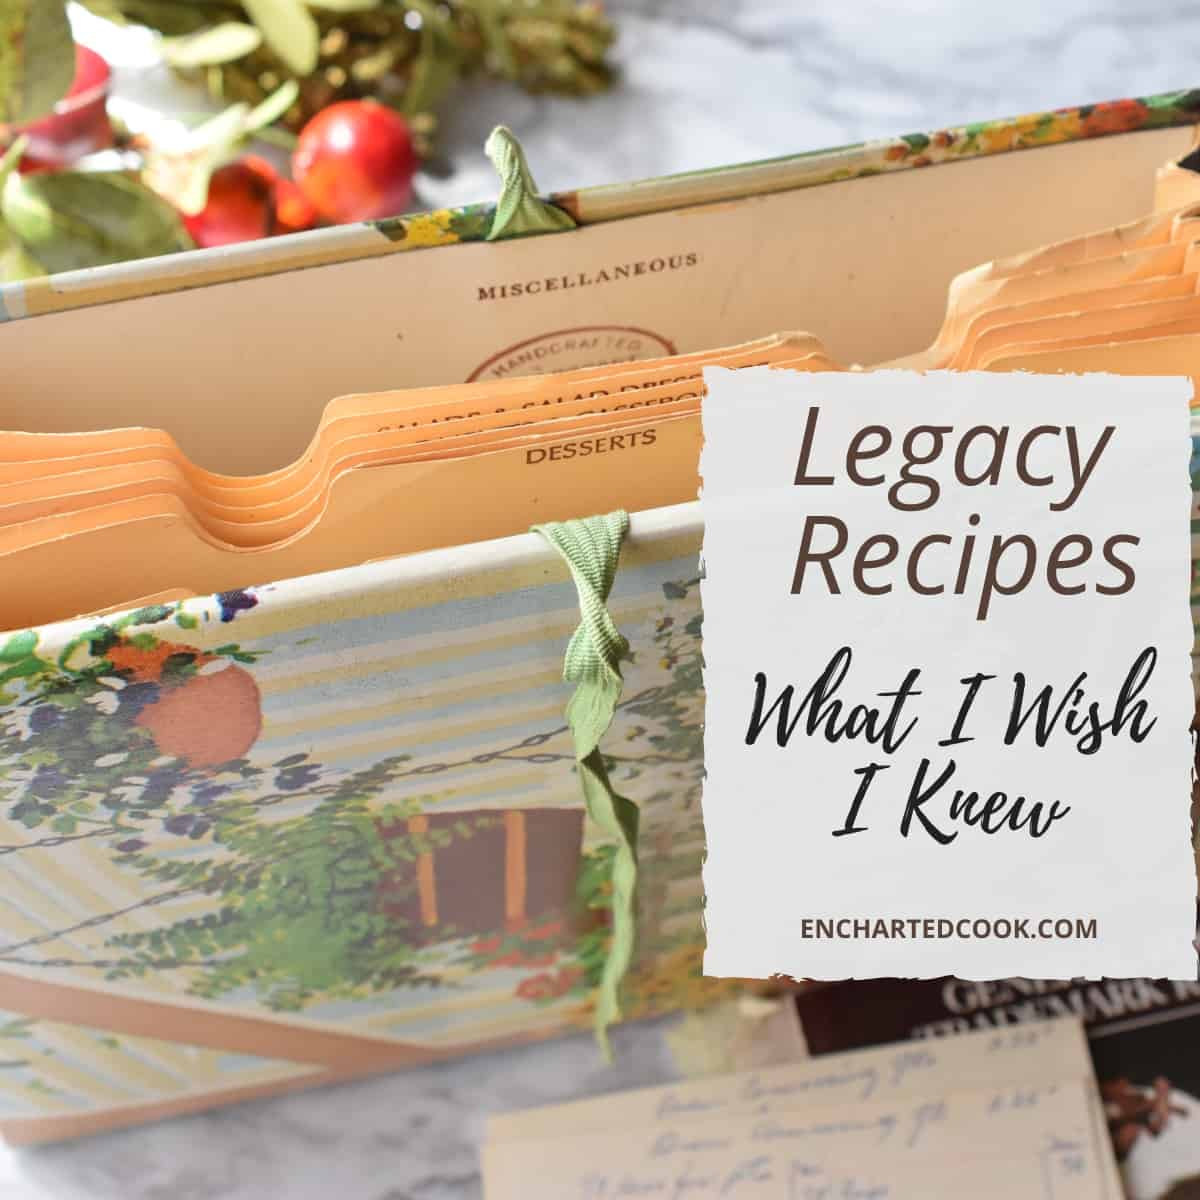 A recipe file slightly open and a banner saying "Legacy Recipes, What I Wish I Knew".